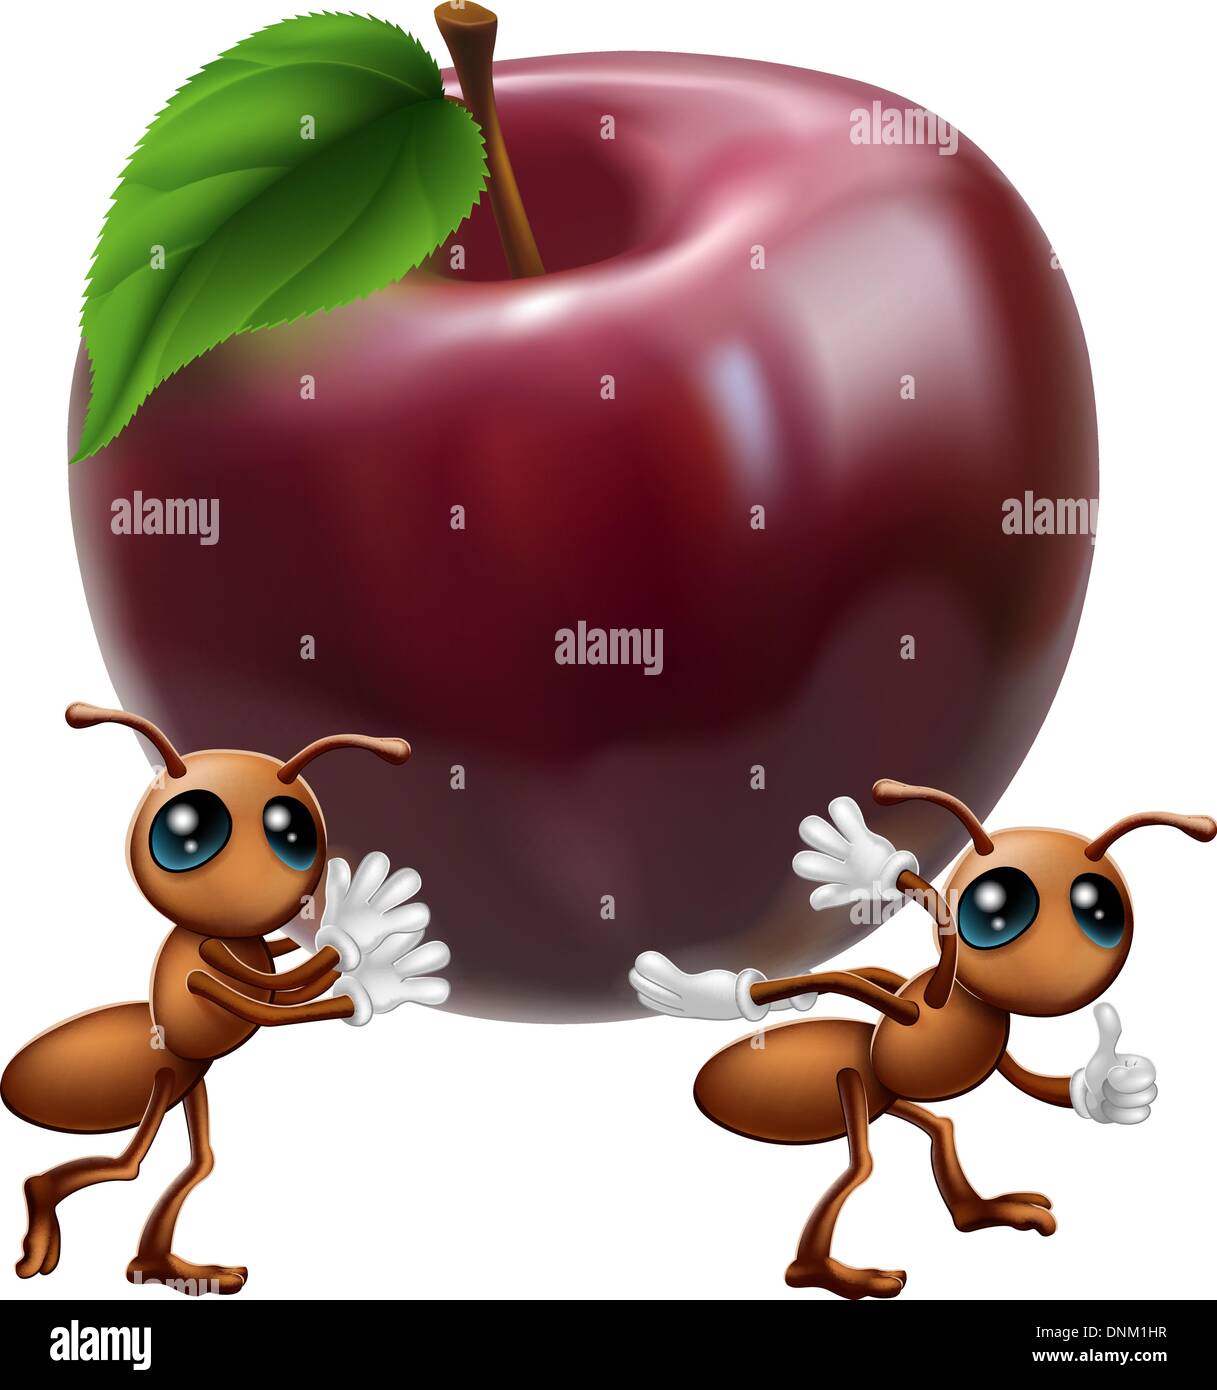 An illustration of two ant characters carrying a big apple. A conceptual illustration for teamwork or helping each other. Stock Vector